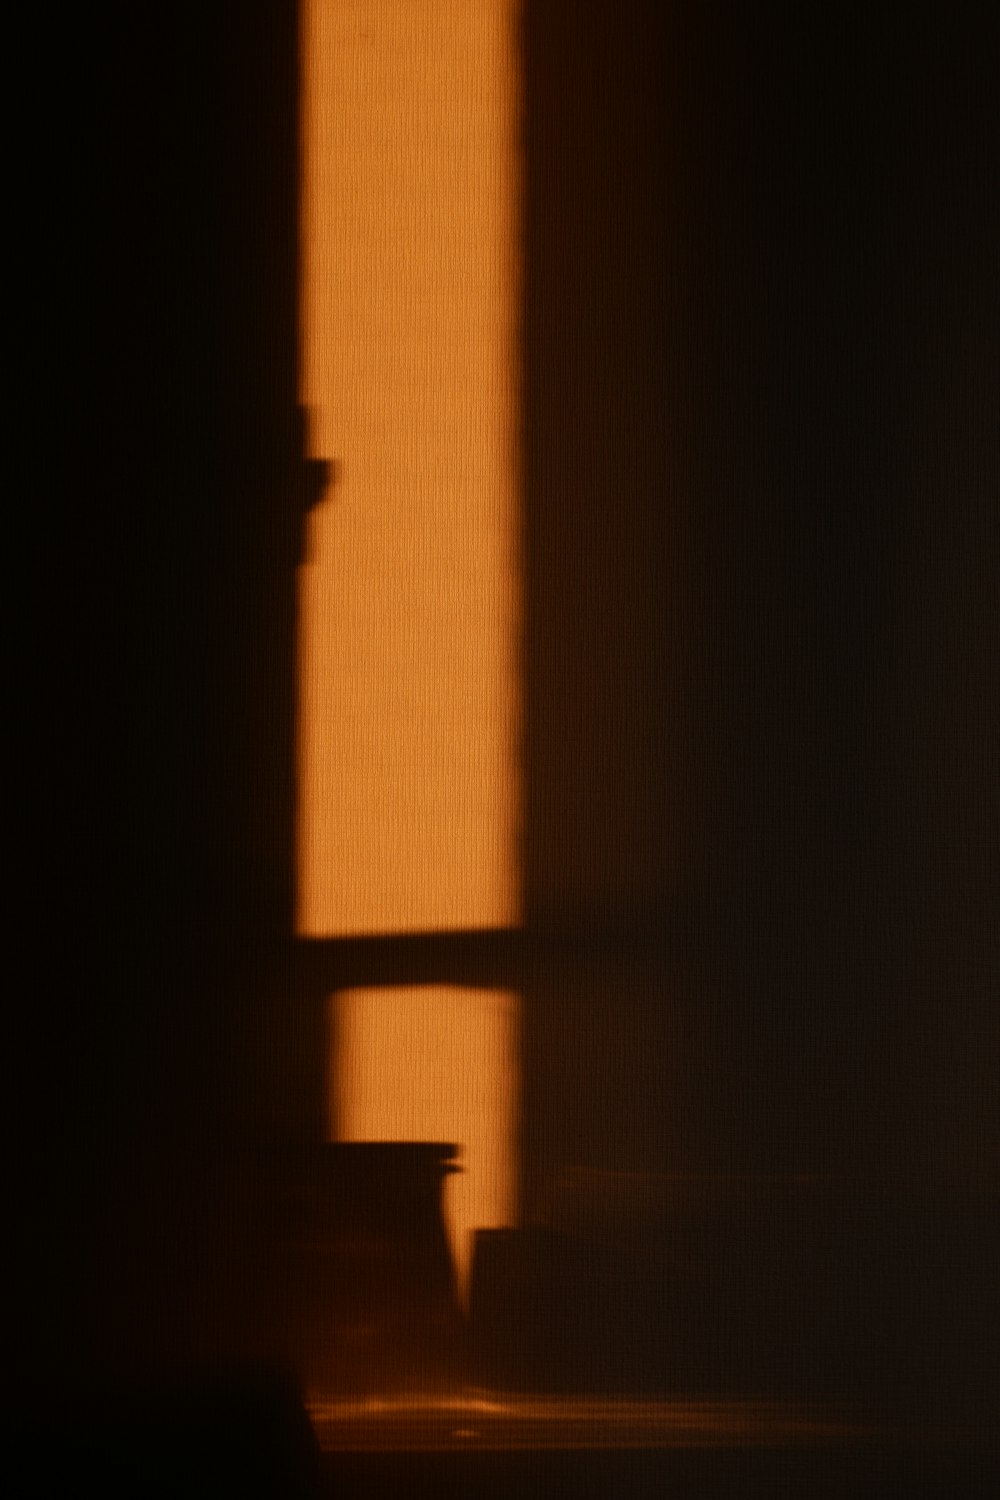 silhouette of a person standing on a dark room